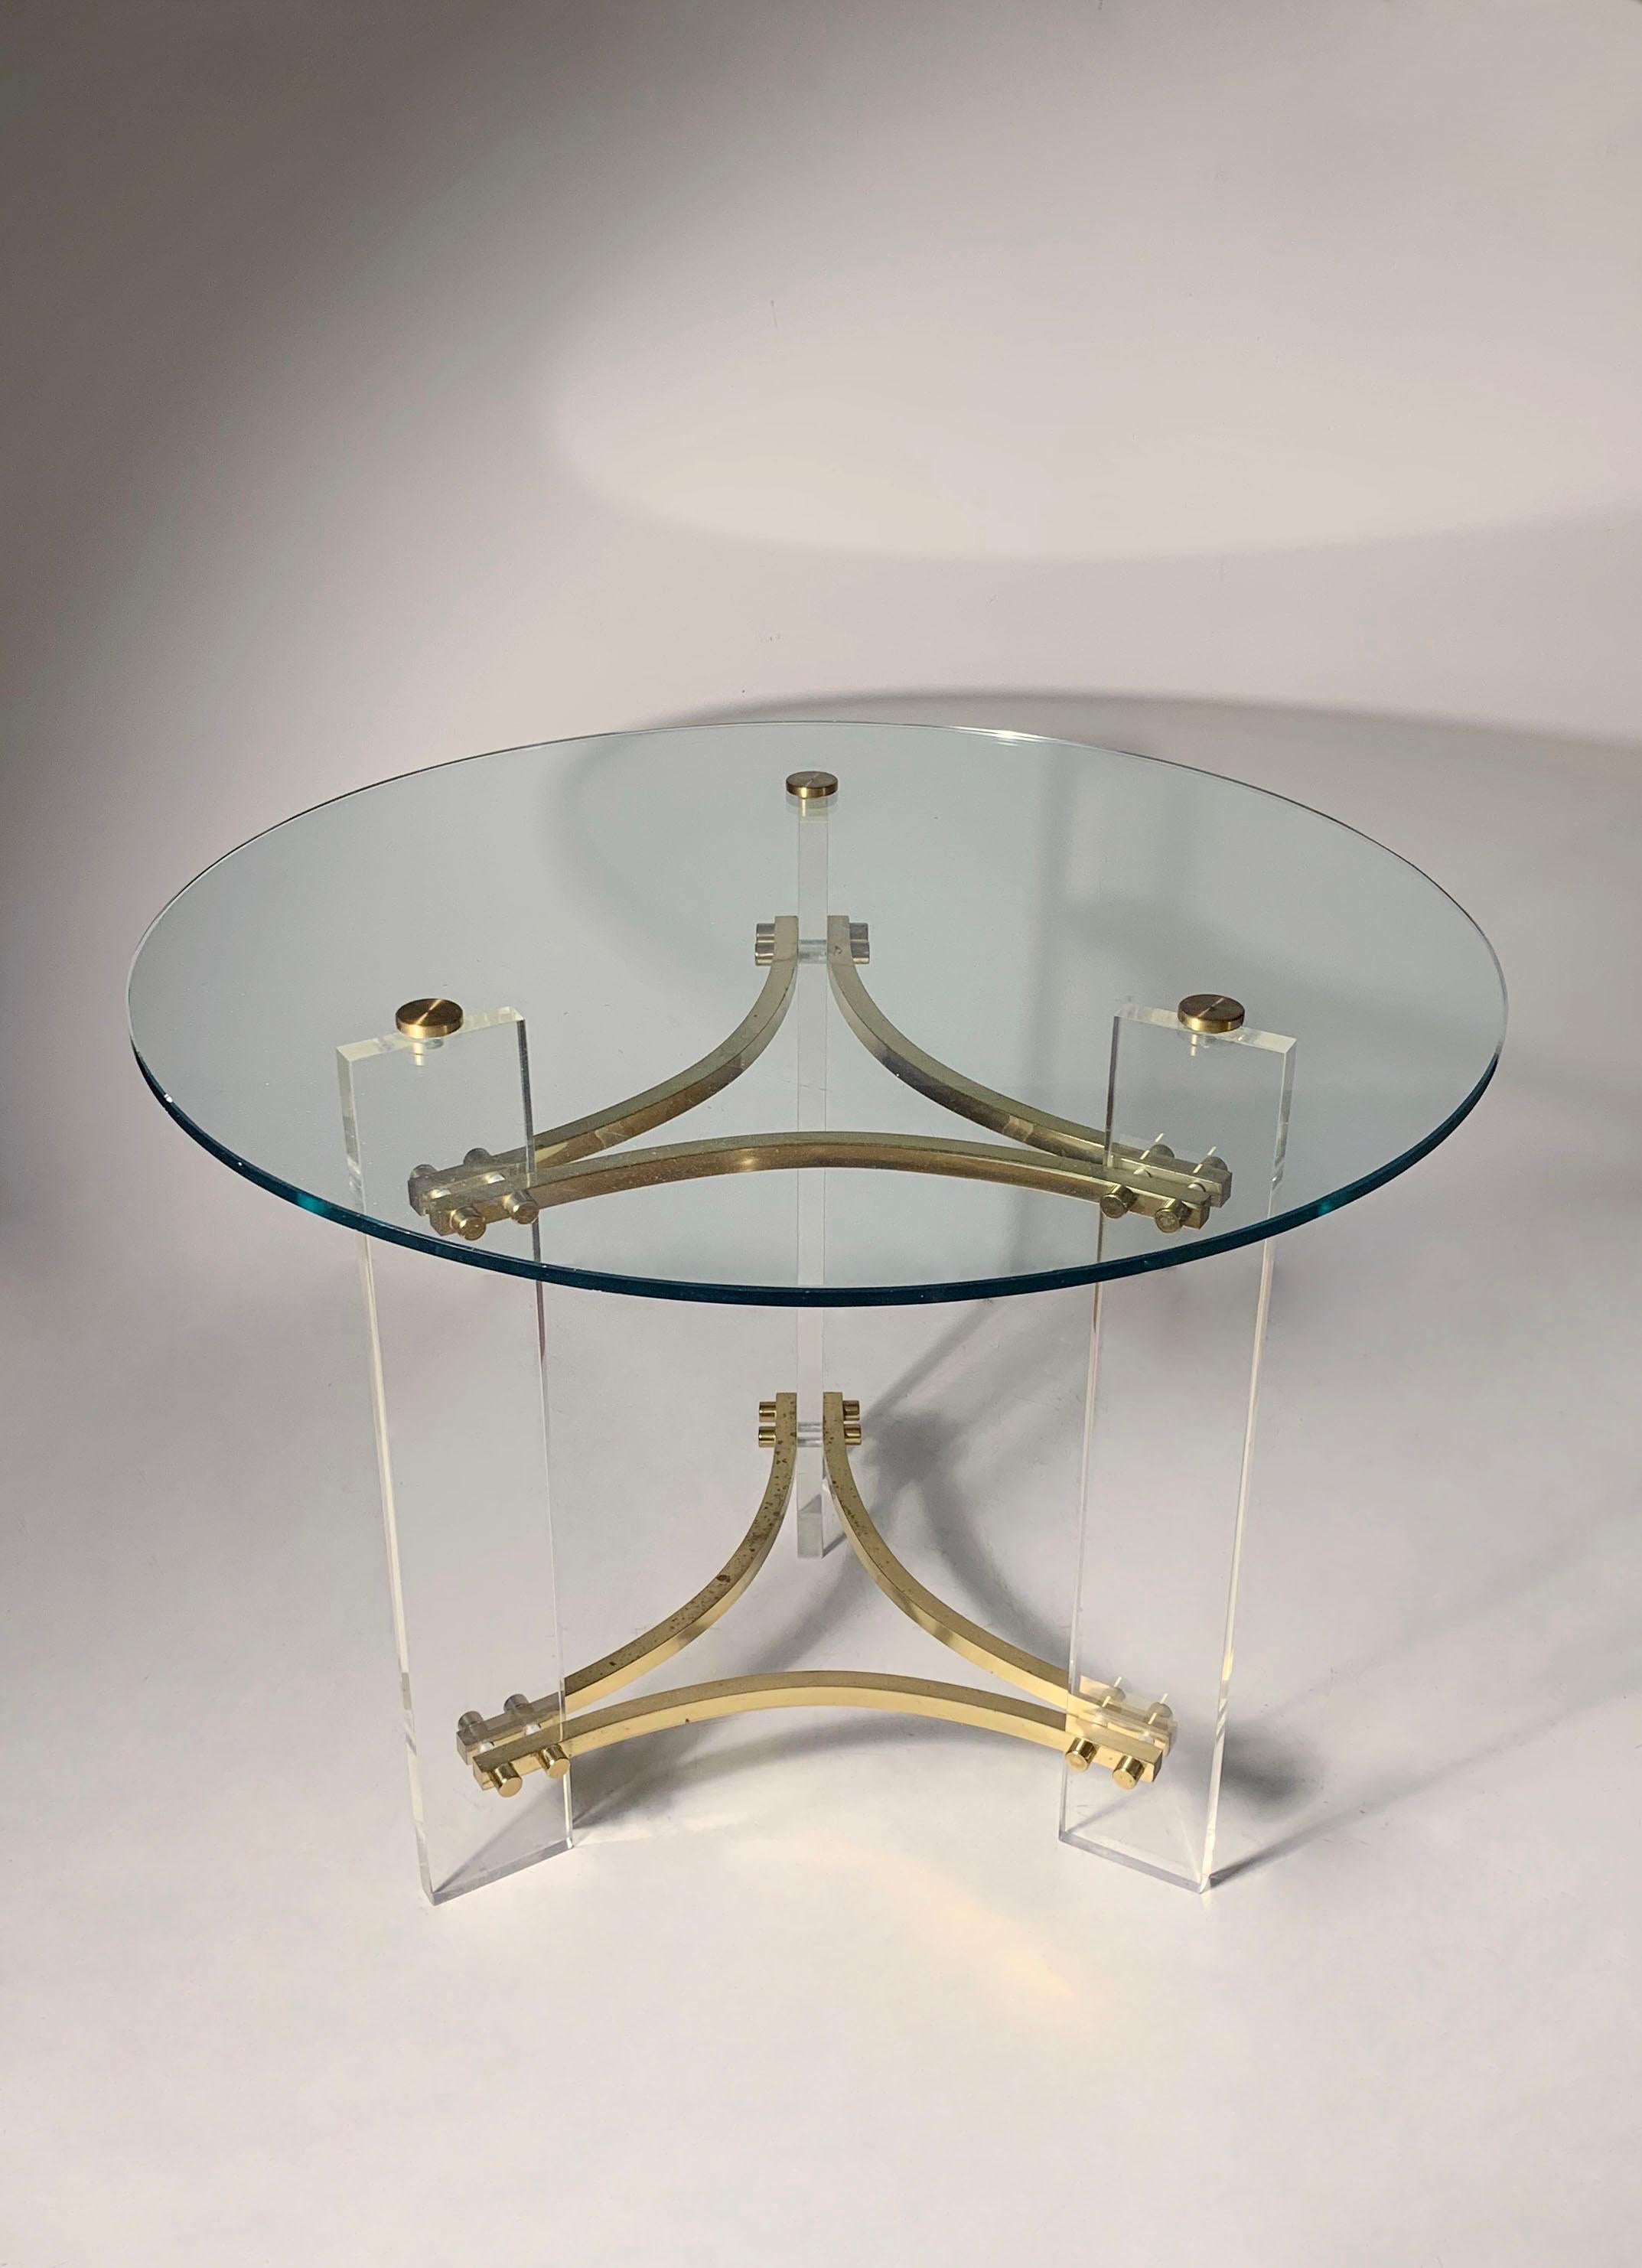 Vintage Lucite, Brass & Glass Charles Hollis Jones Accent Table

Table shows vintage wear such as scratches to the lucite and some minor spots of patination to the brass finish